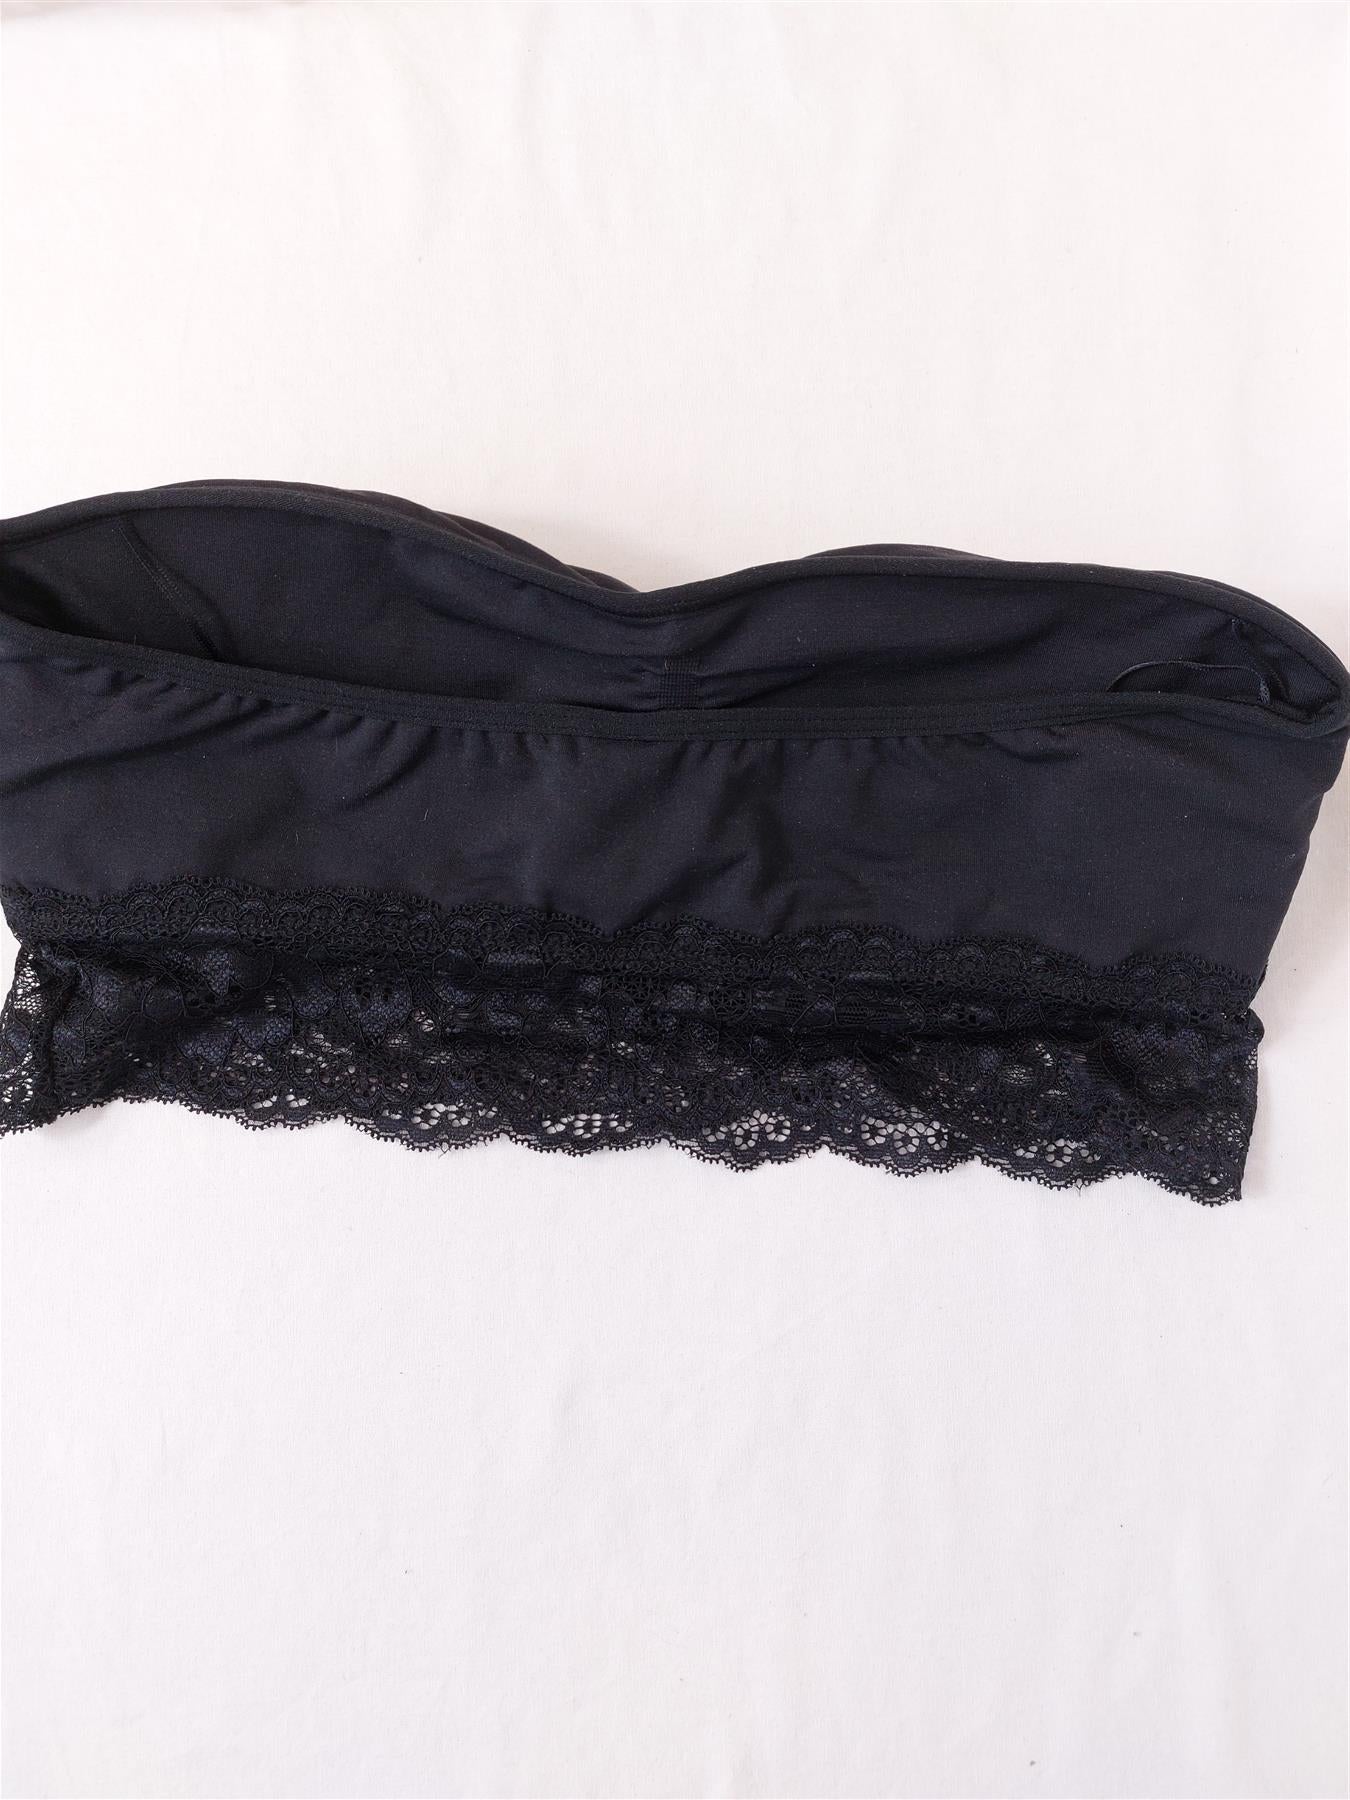 Lace Bandeau Strapless Bra Padded Non-Wired Brand New